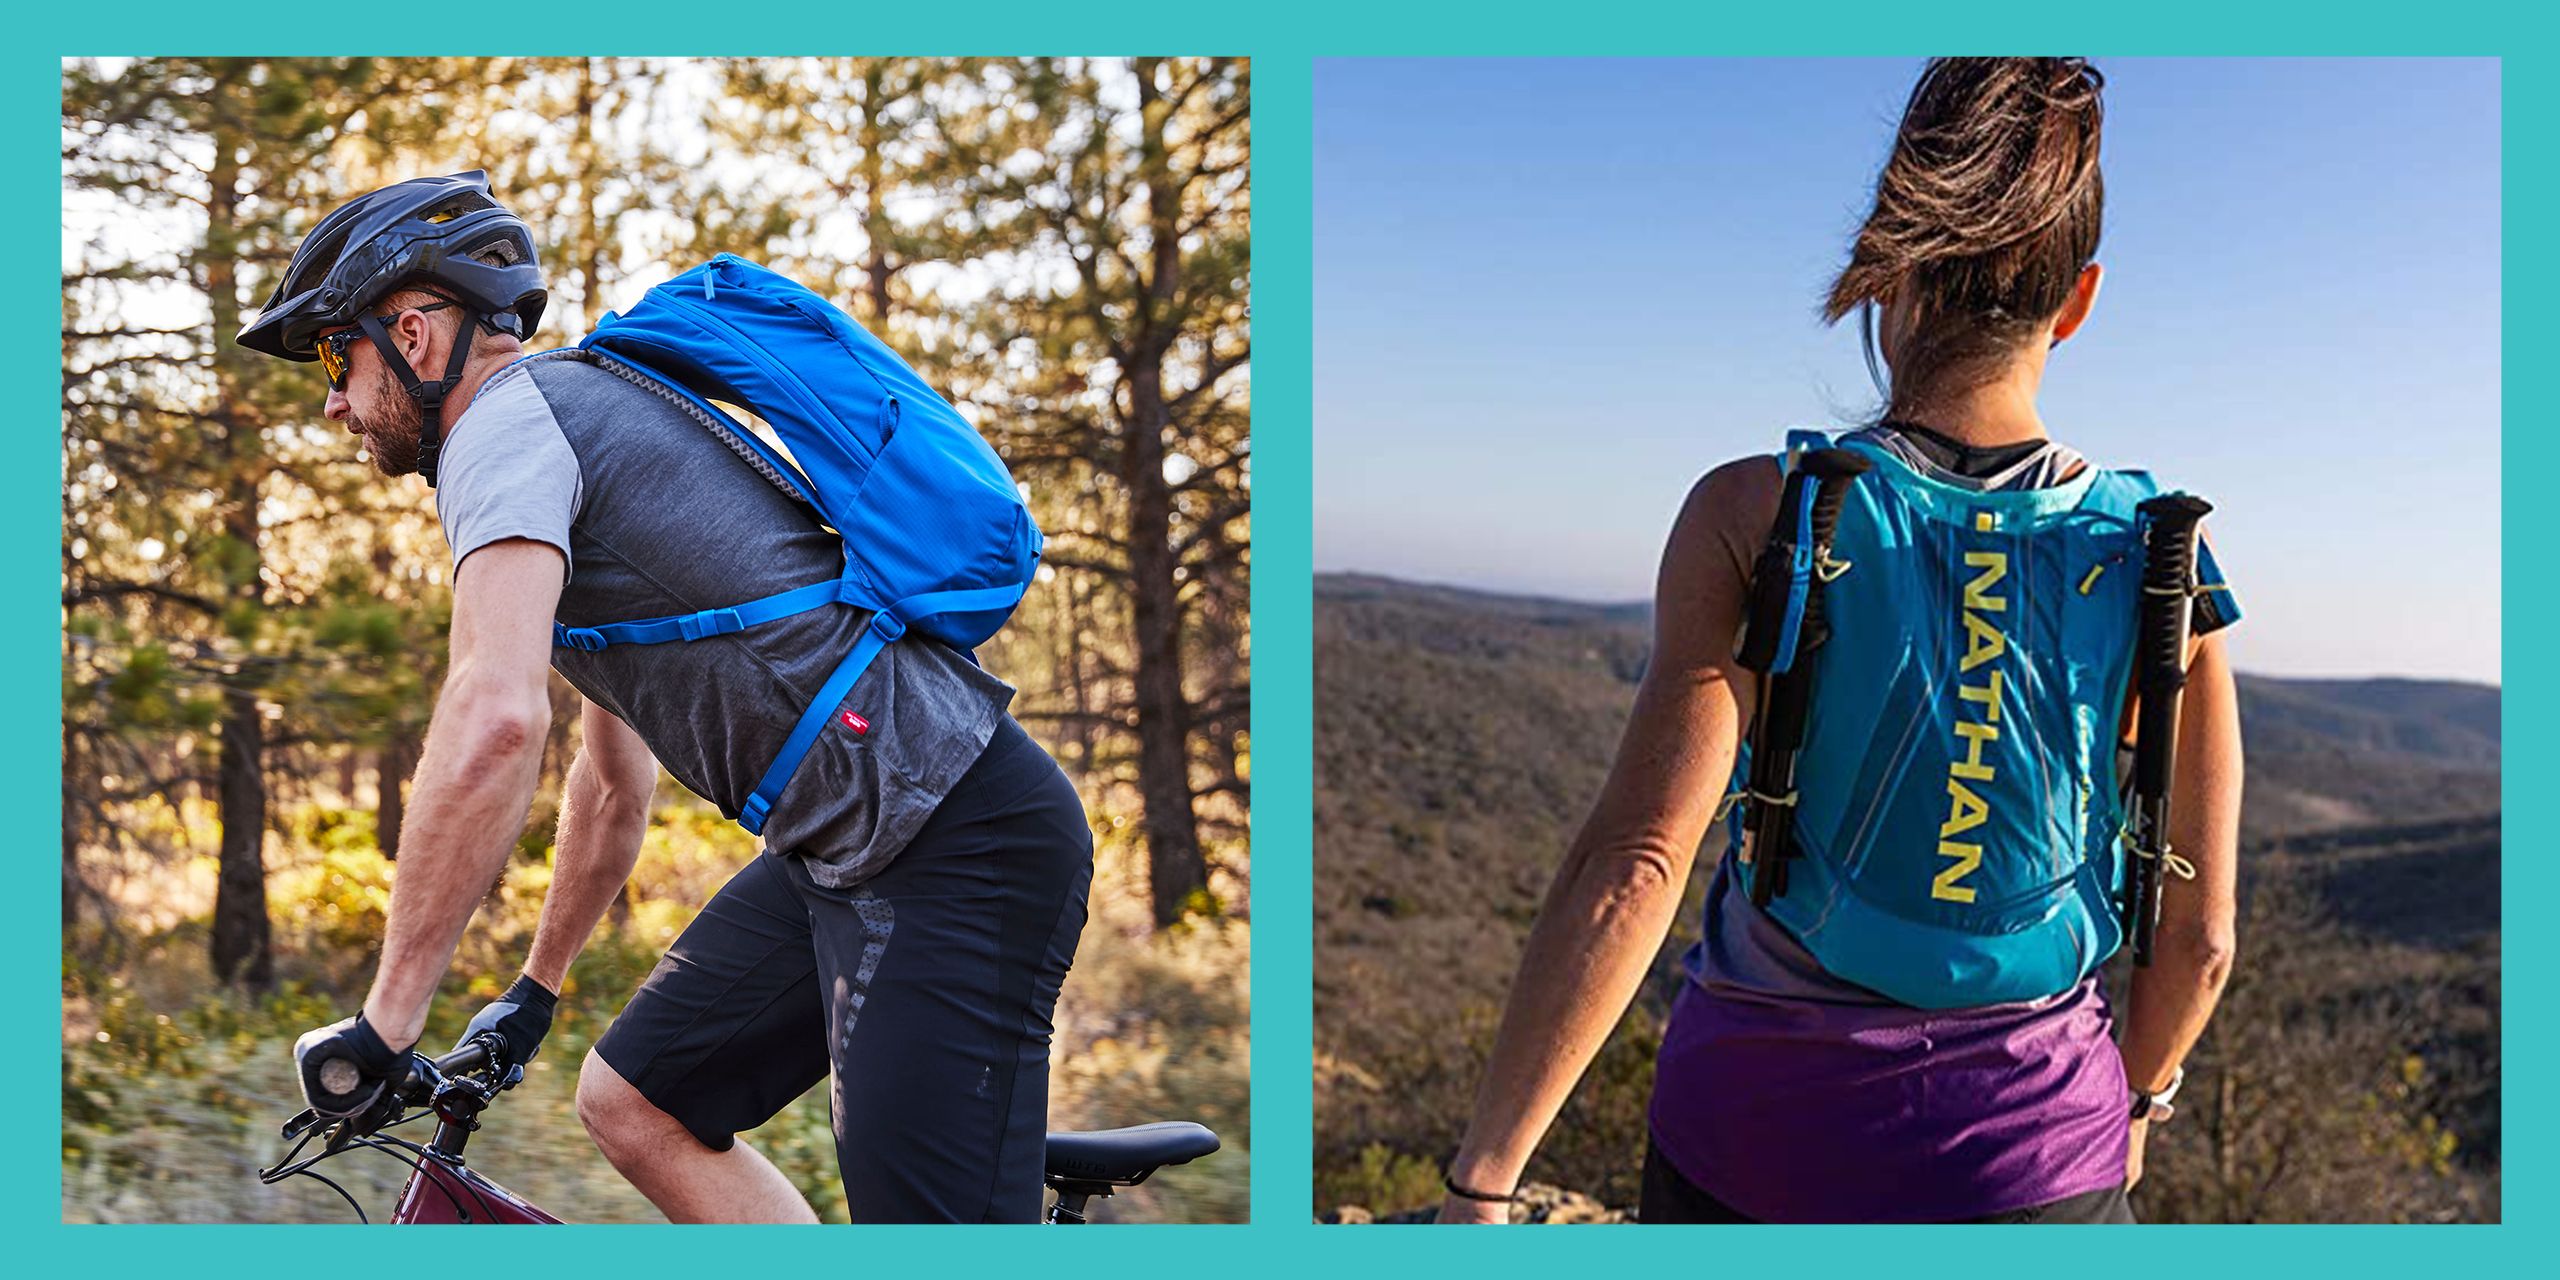 Nylon Backpack Water Bags with Capacity of 2l-4l for Hiking Riding Climbing Outdoor Sports 